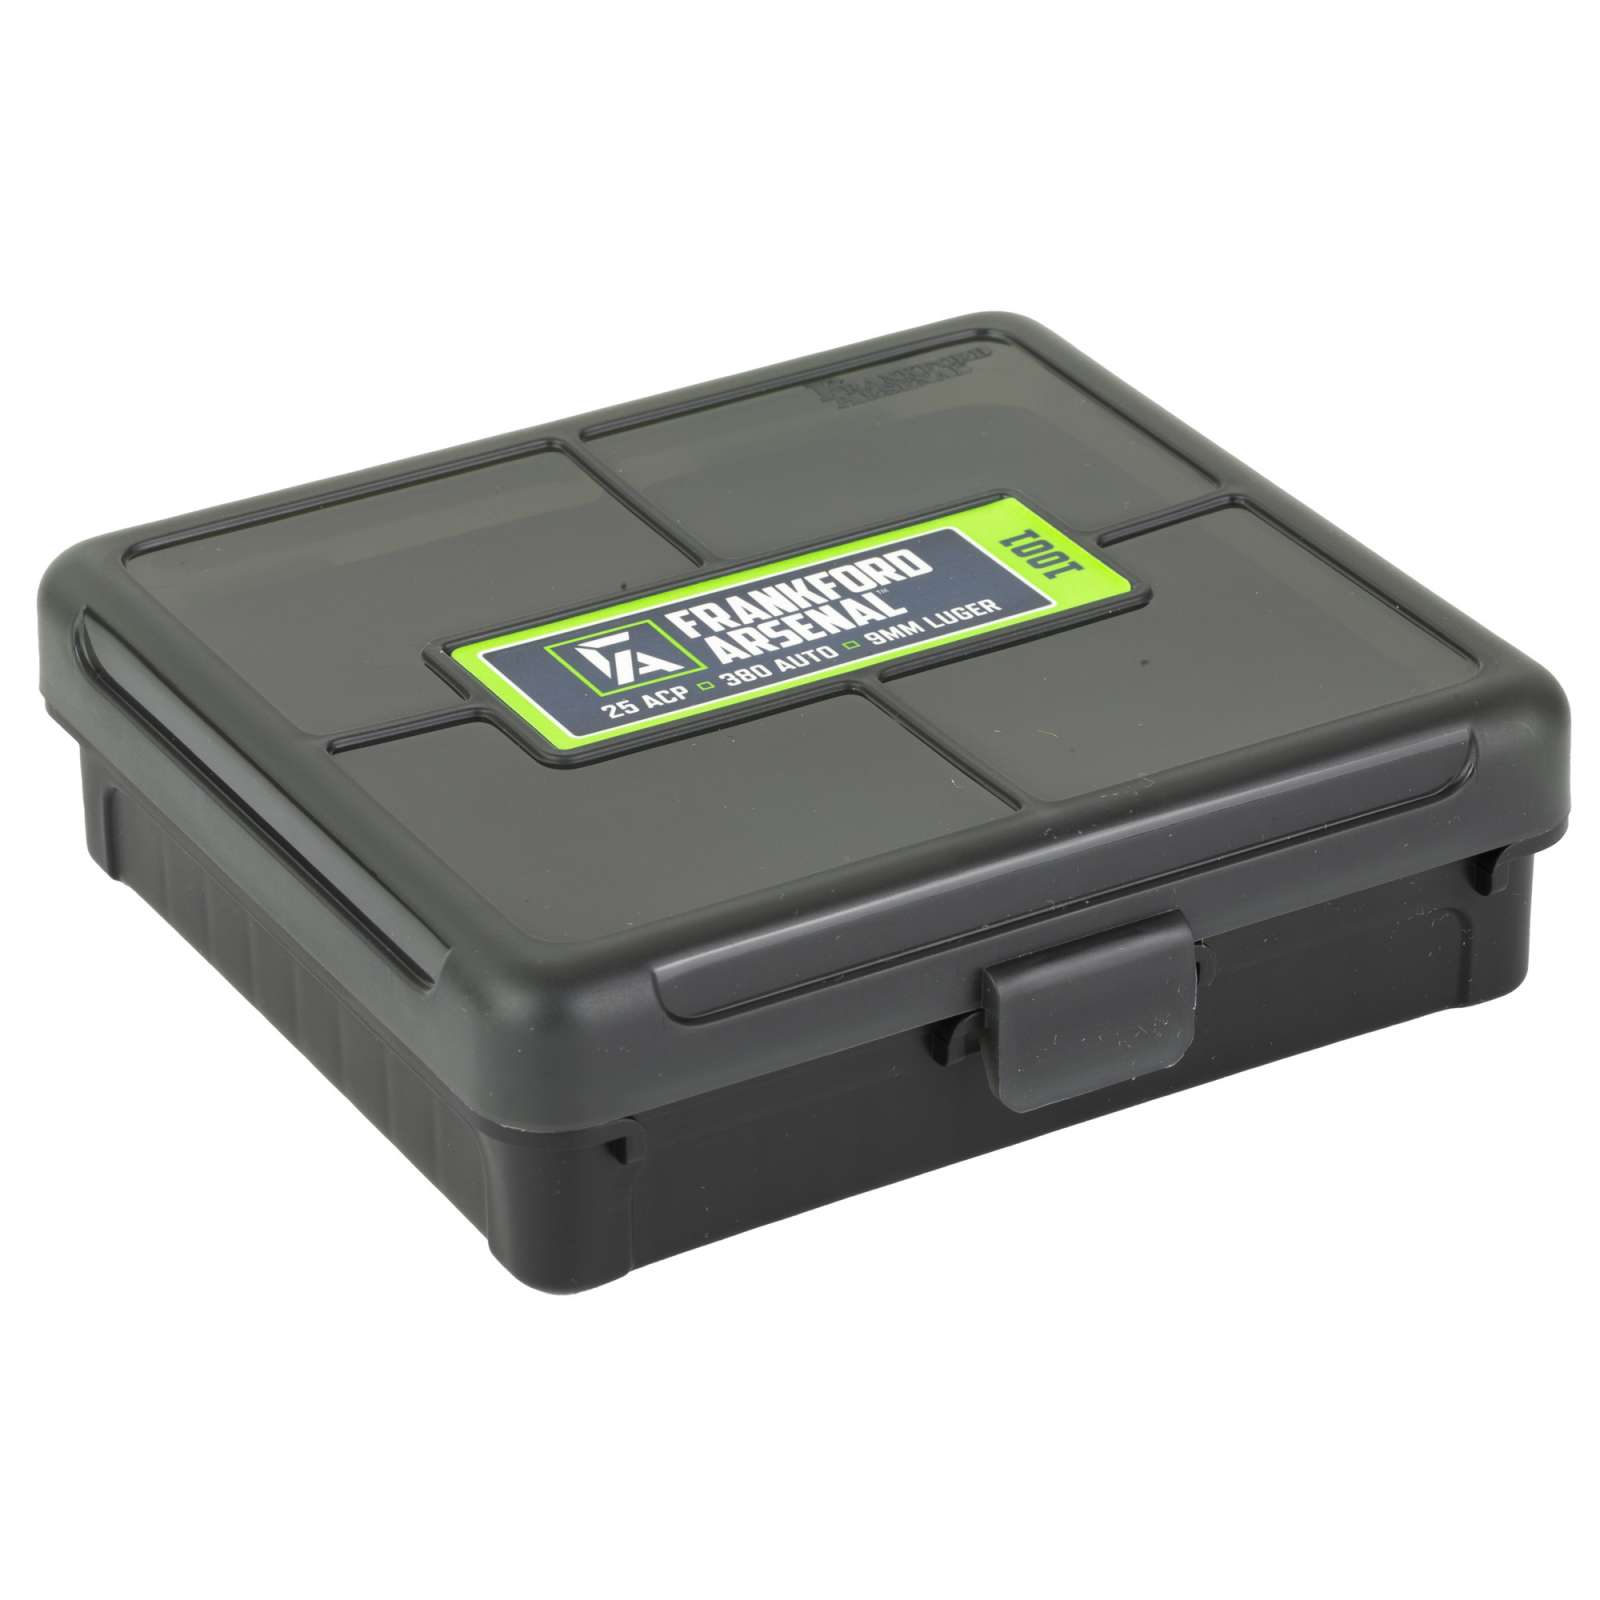  Frankford Arsenal Hinge-Top Ammo Box #1001 with True